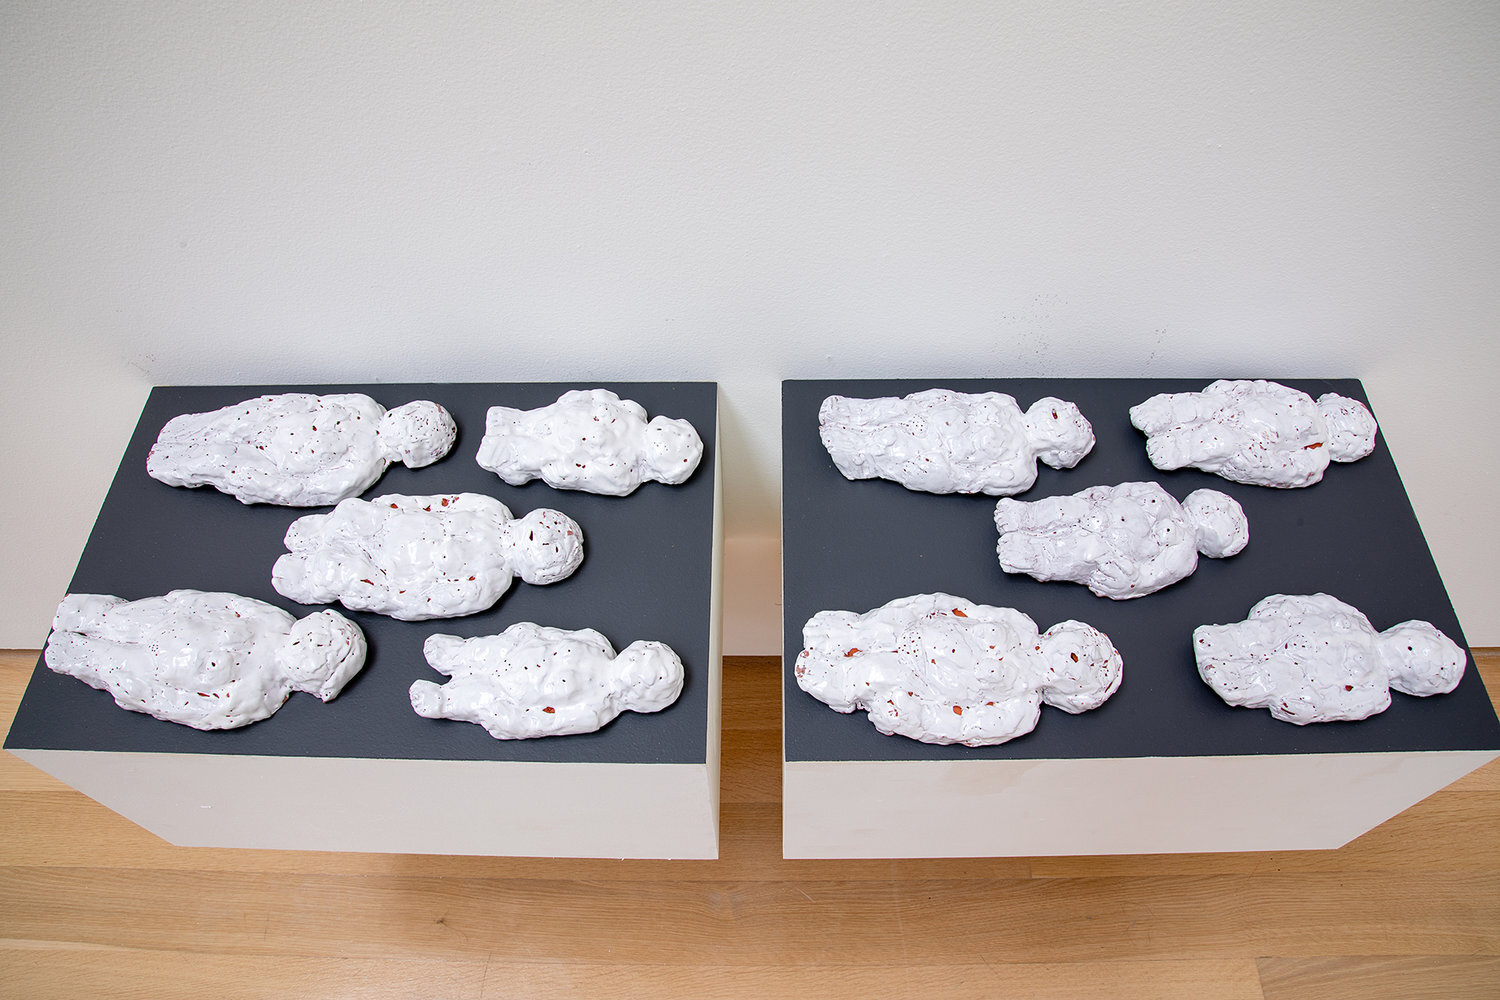 “For Girls Becoming Women; everyday encounters” (view 8), 2019, Solo Exhibition Installation, Gund Gallery, Kenyon College, Gambier, Ohio